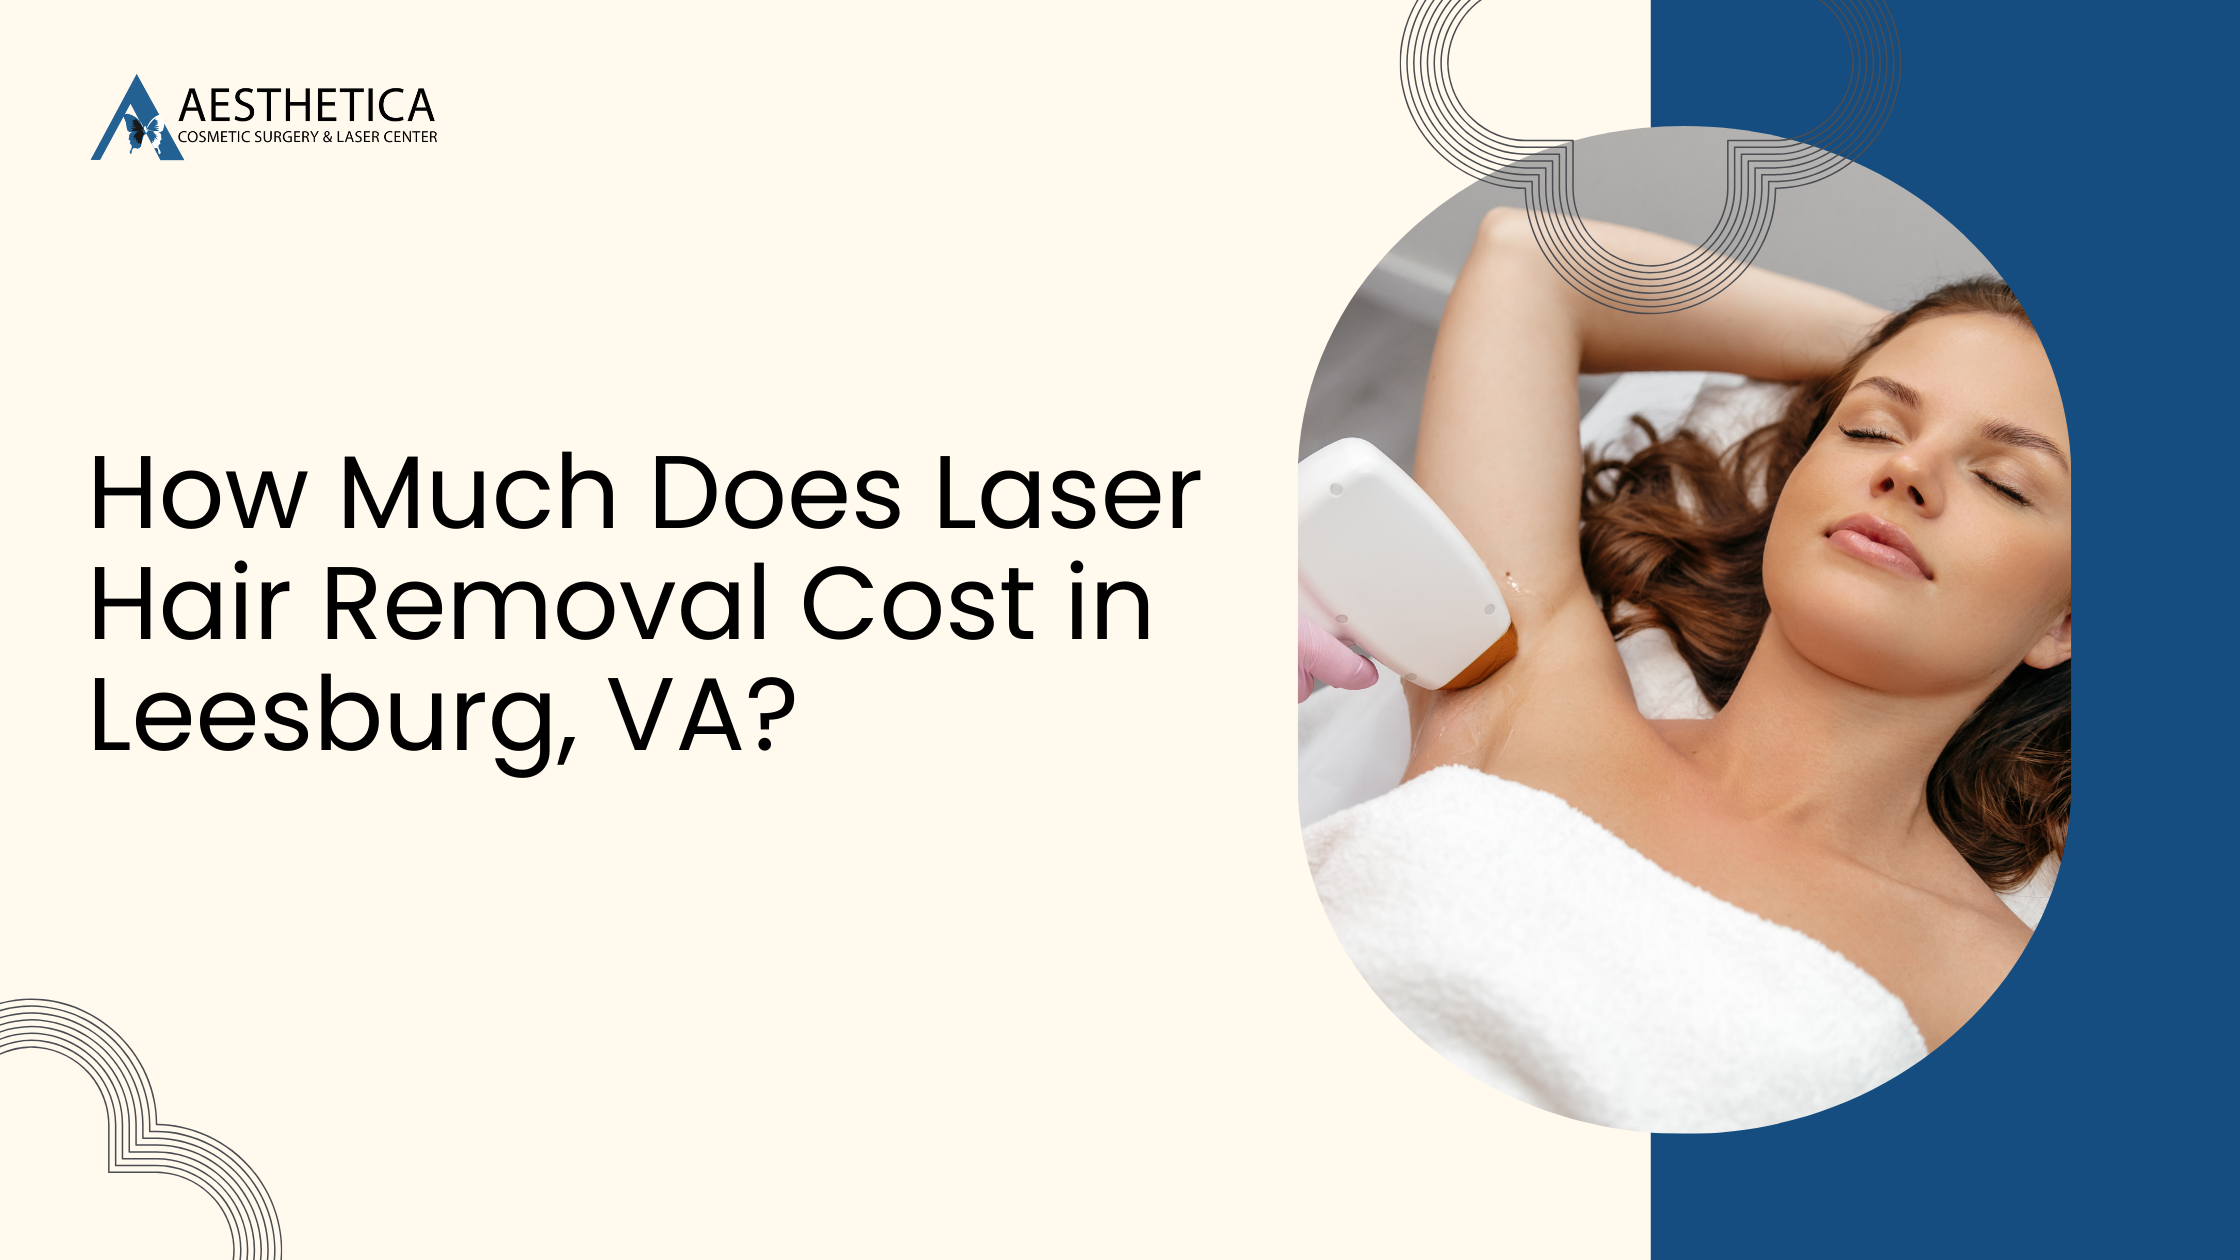 How Much Does Laser Hair Removal Cost in Leesburg, VA?